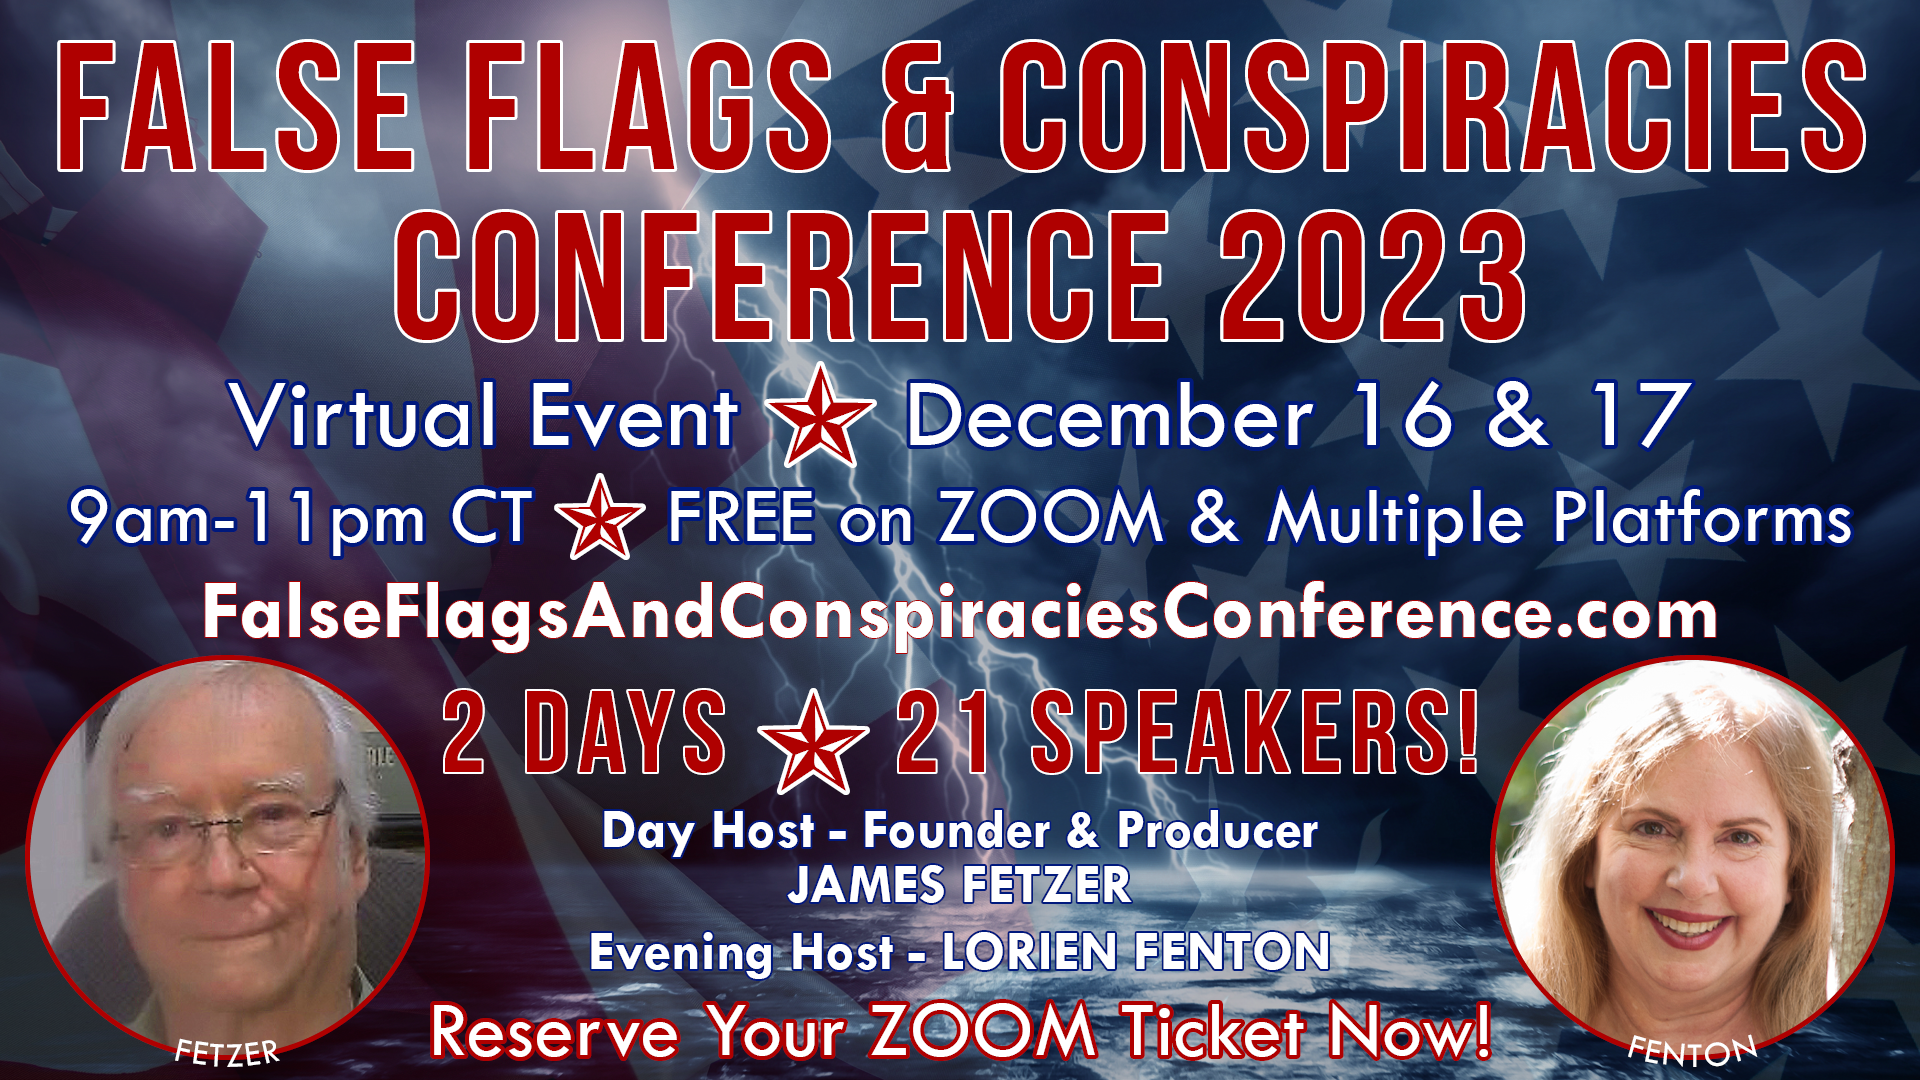 Join Us at the False Flags and Conspiracies Conference 2023 - Dec. 16 & 17